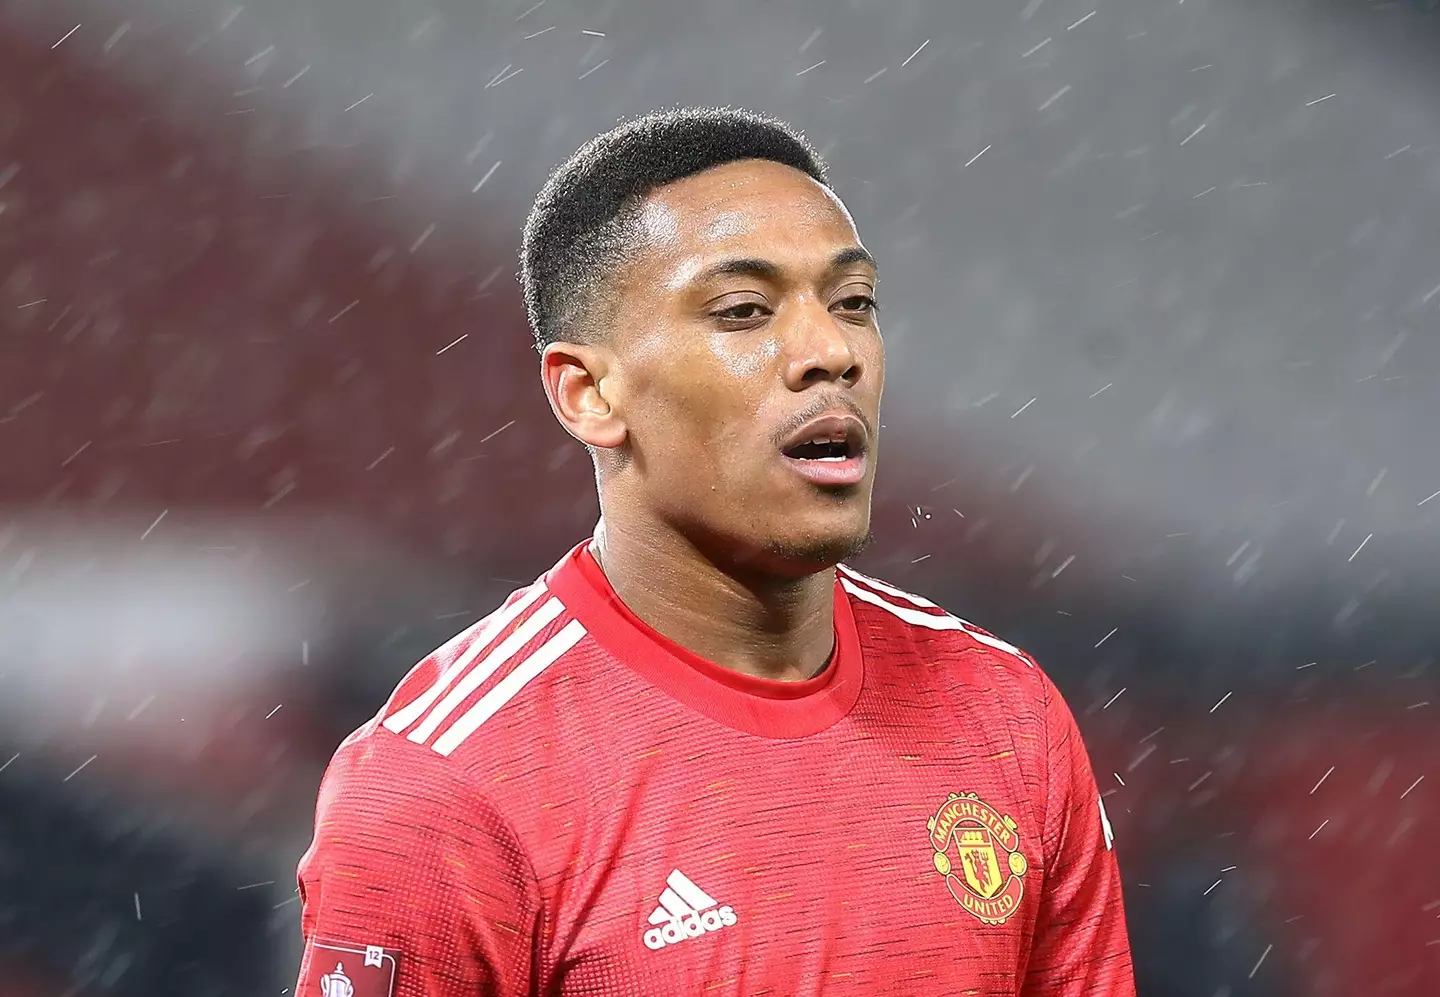 Anthony Martial wants to leave United in January according to his agent (image credit: Alamy)